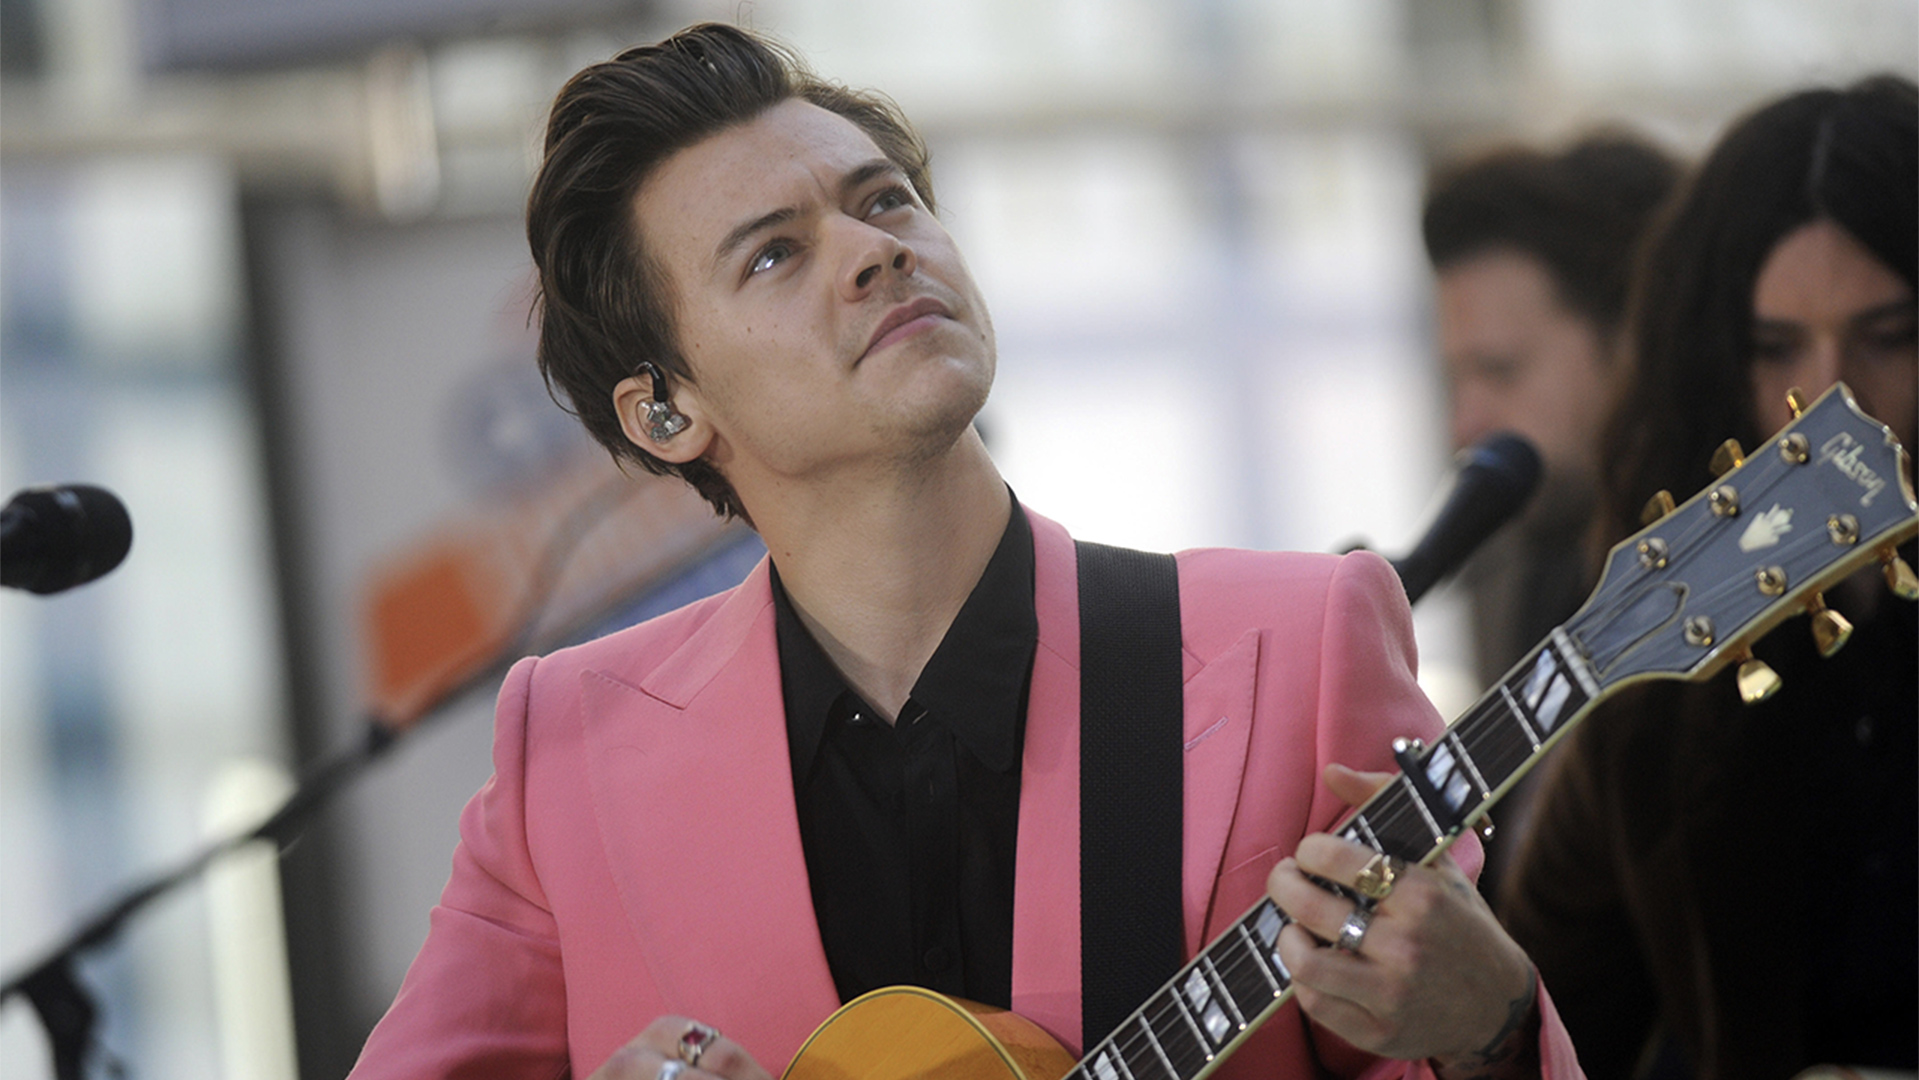 Harry Styles wearing a pink suit, holding a guitar and performing